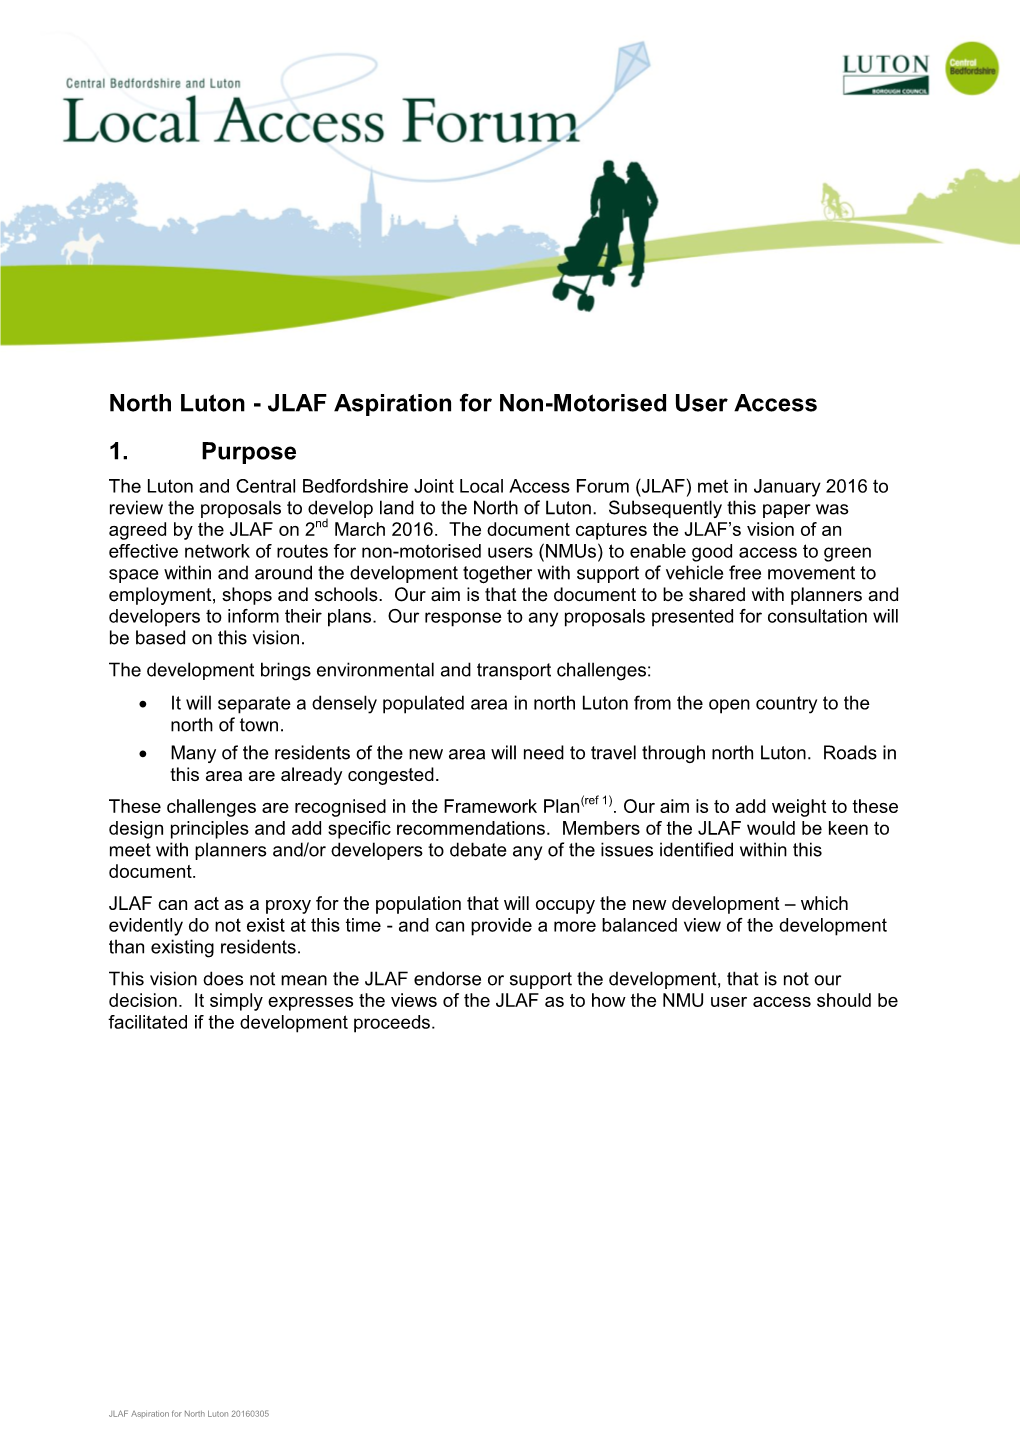 North Luton - JLAF Aspiration for Non-Motorised User Access